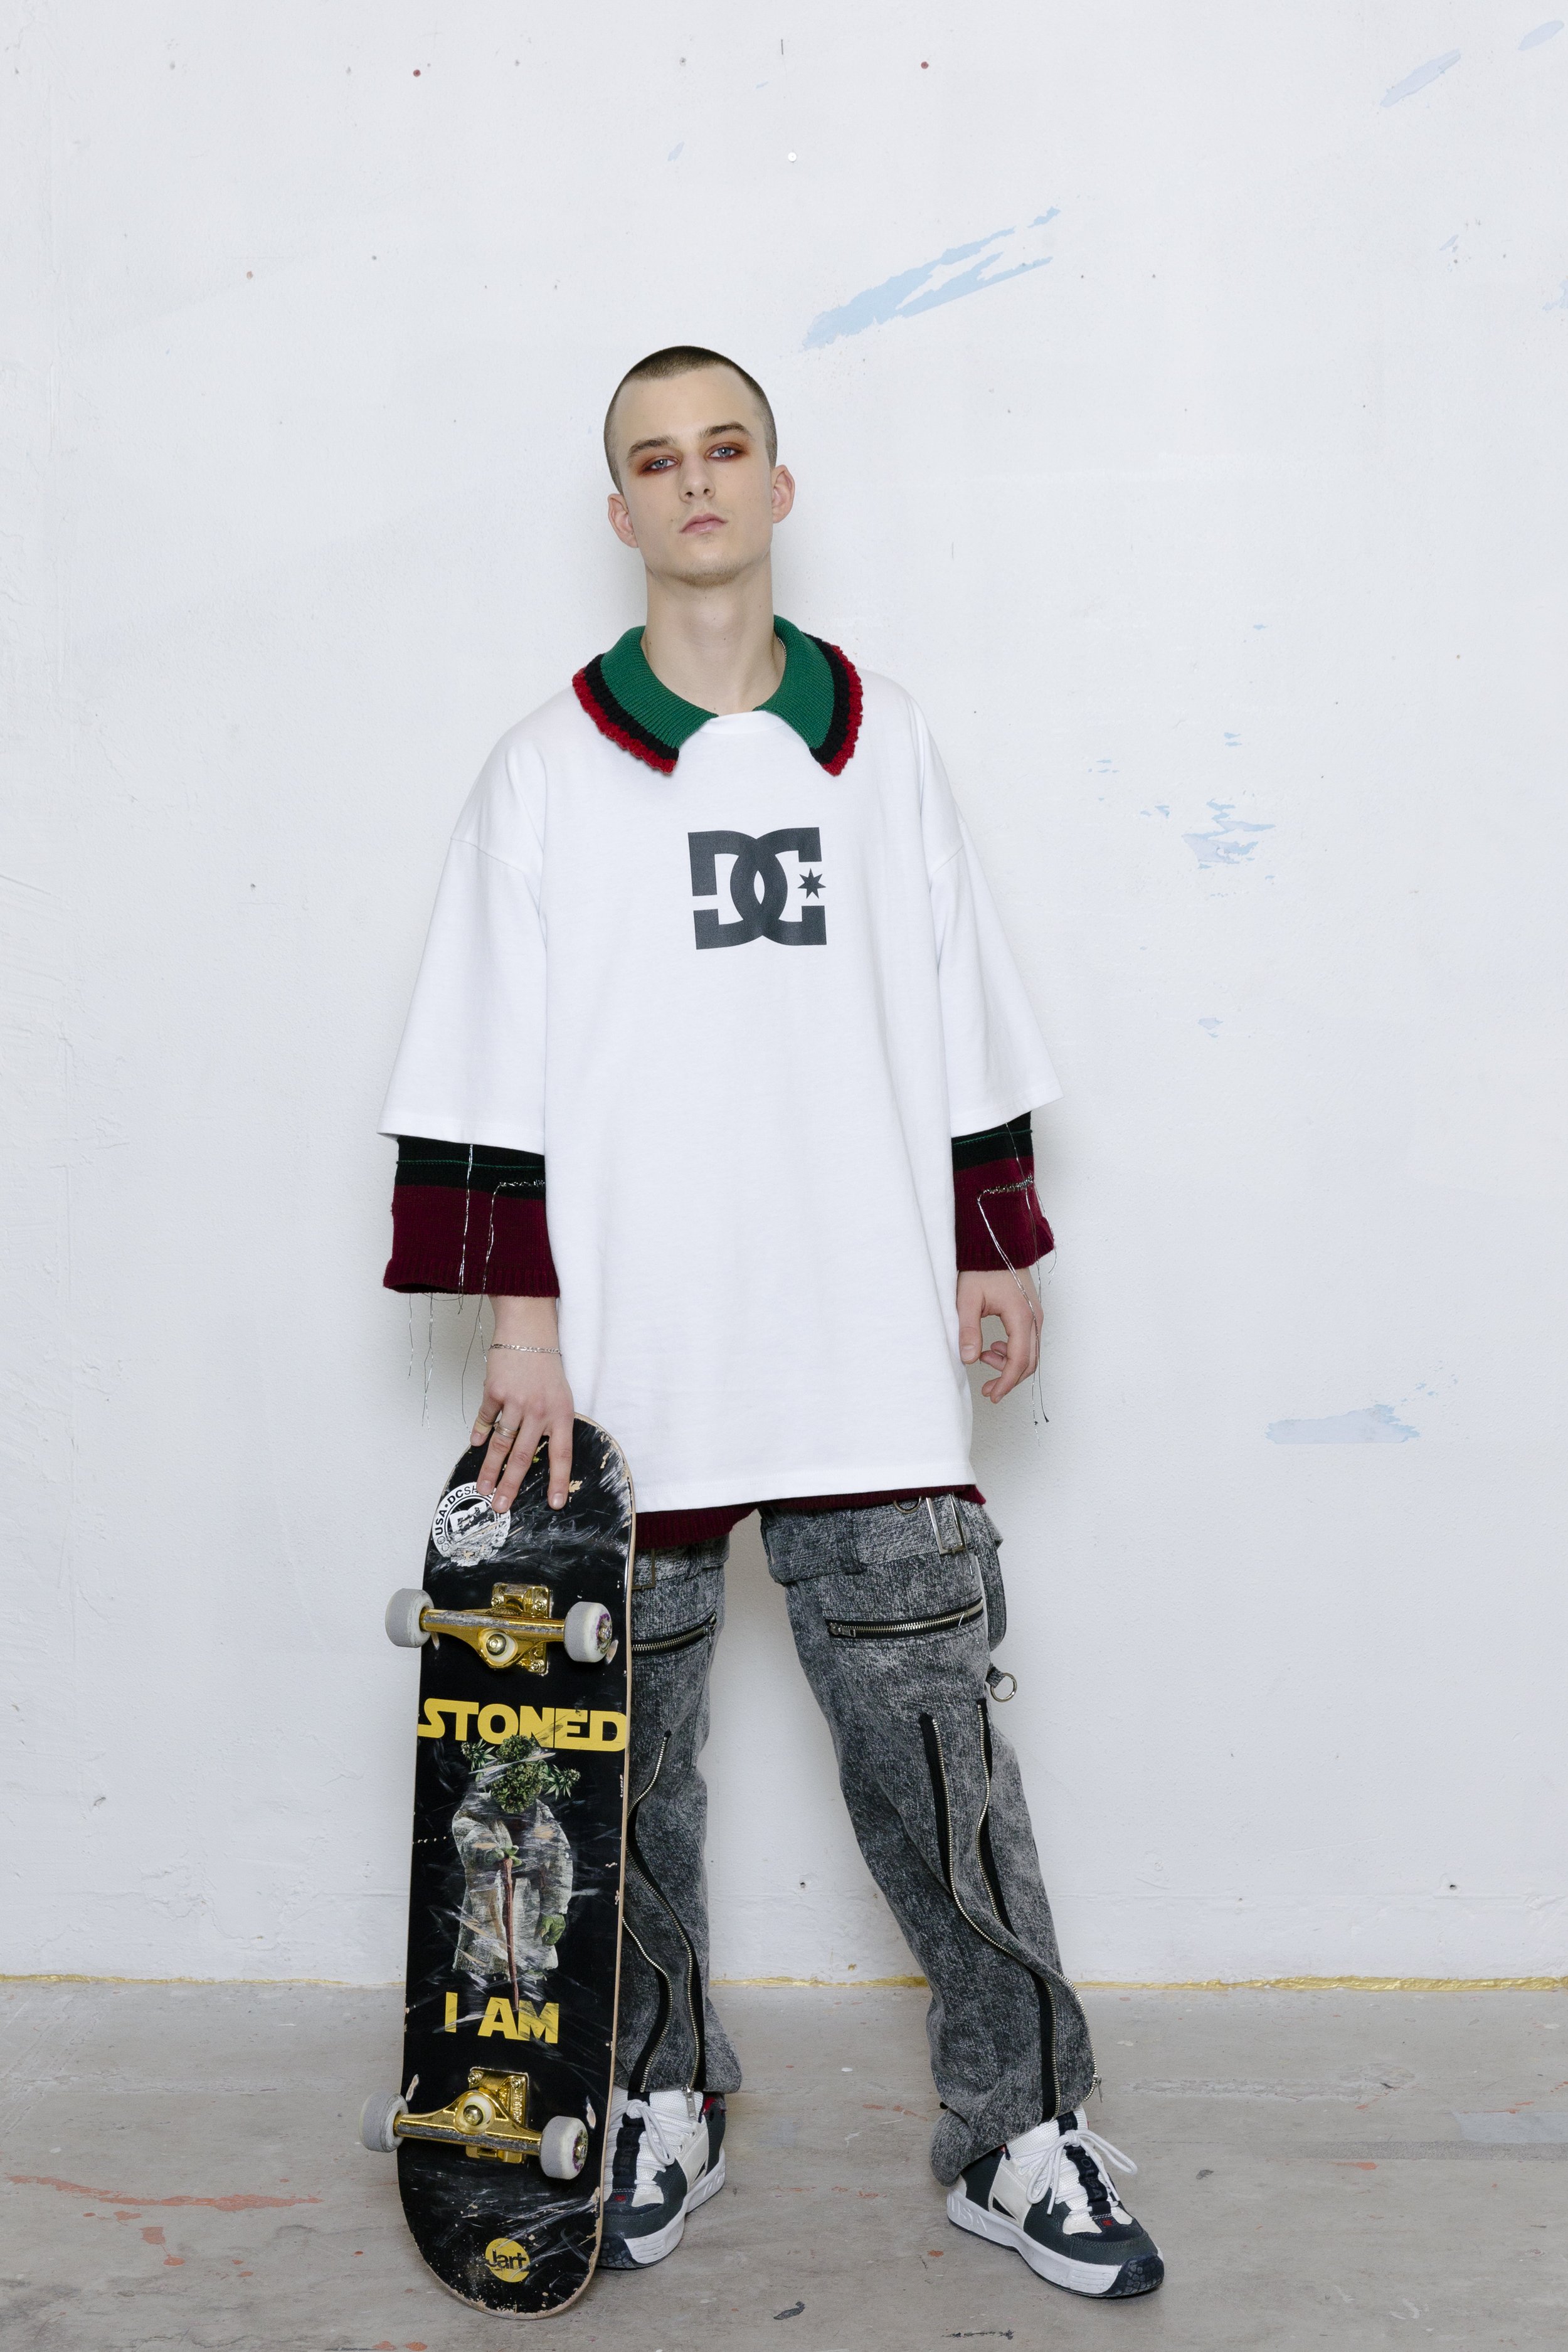 DC SHOES ROCKS PARIS FASHION WEEK IN COLLABORATION WITH KIDILL